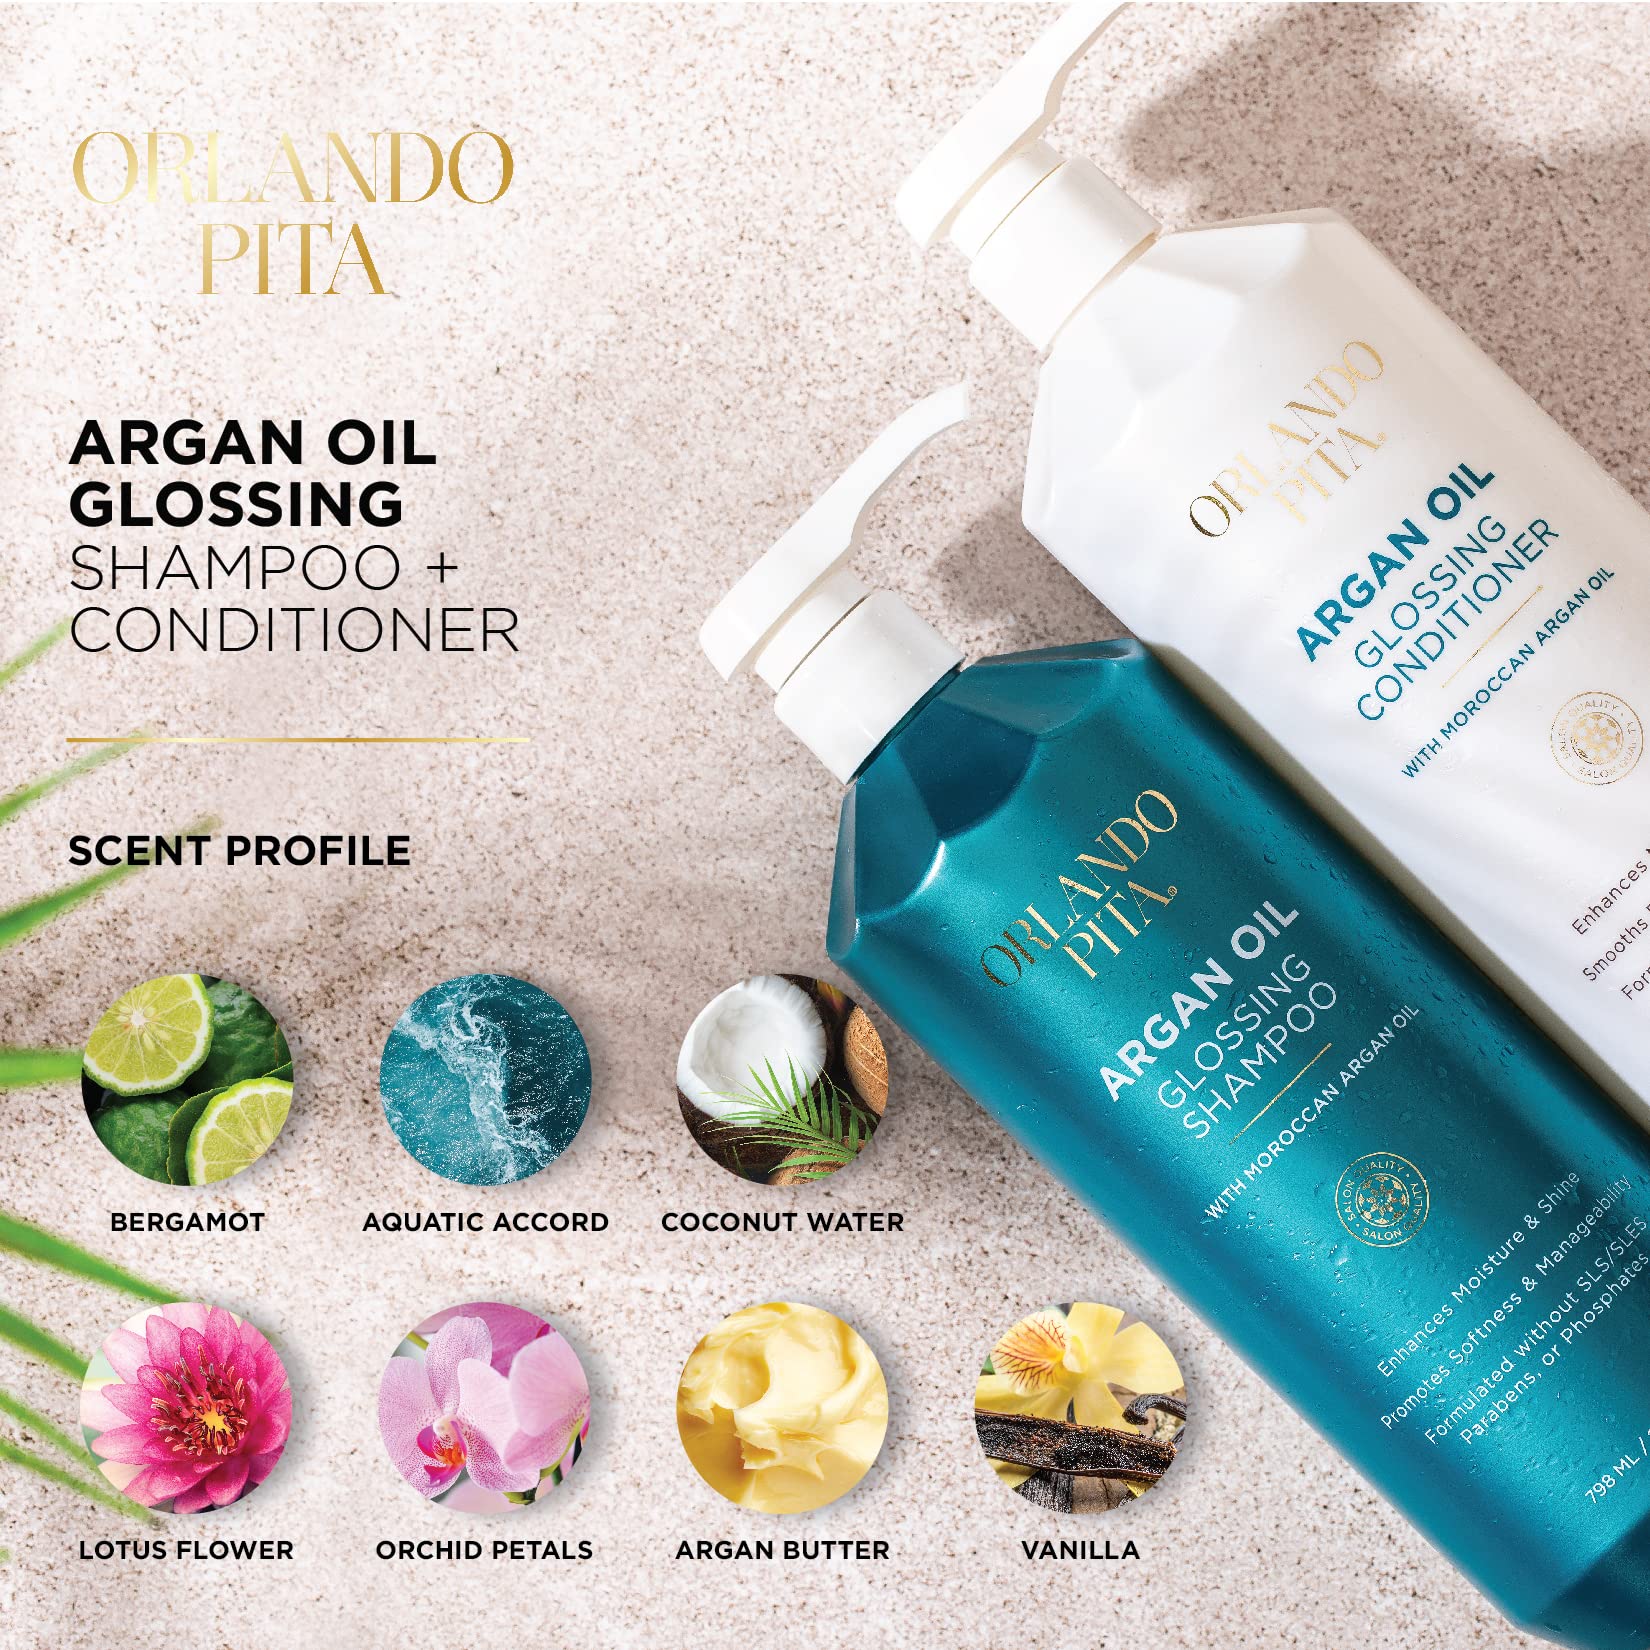 ORLANDO PITA Moroccan Argan Oil Glossing Shampoo & Conditioner Set, Moisturizing, Softening, & Shine-Enhancing for Smoother, More Manageable, & Overall Healthier Hair, 27 Fl Oz Each